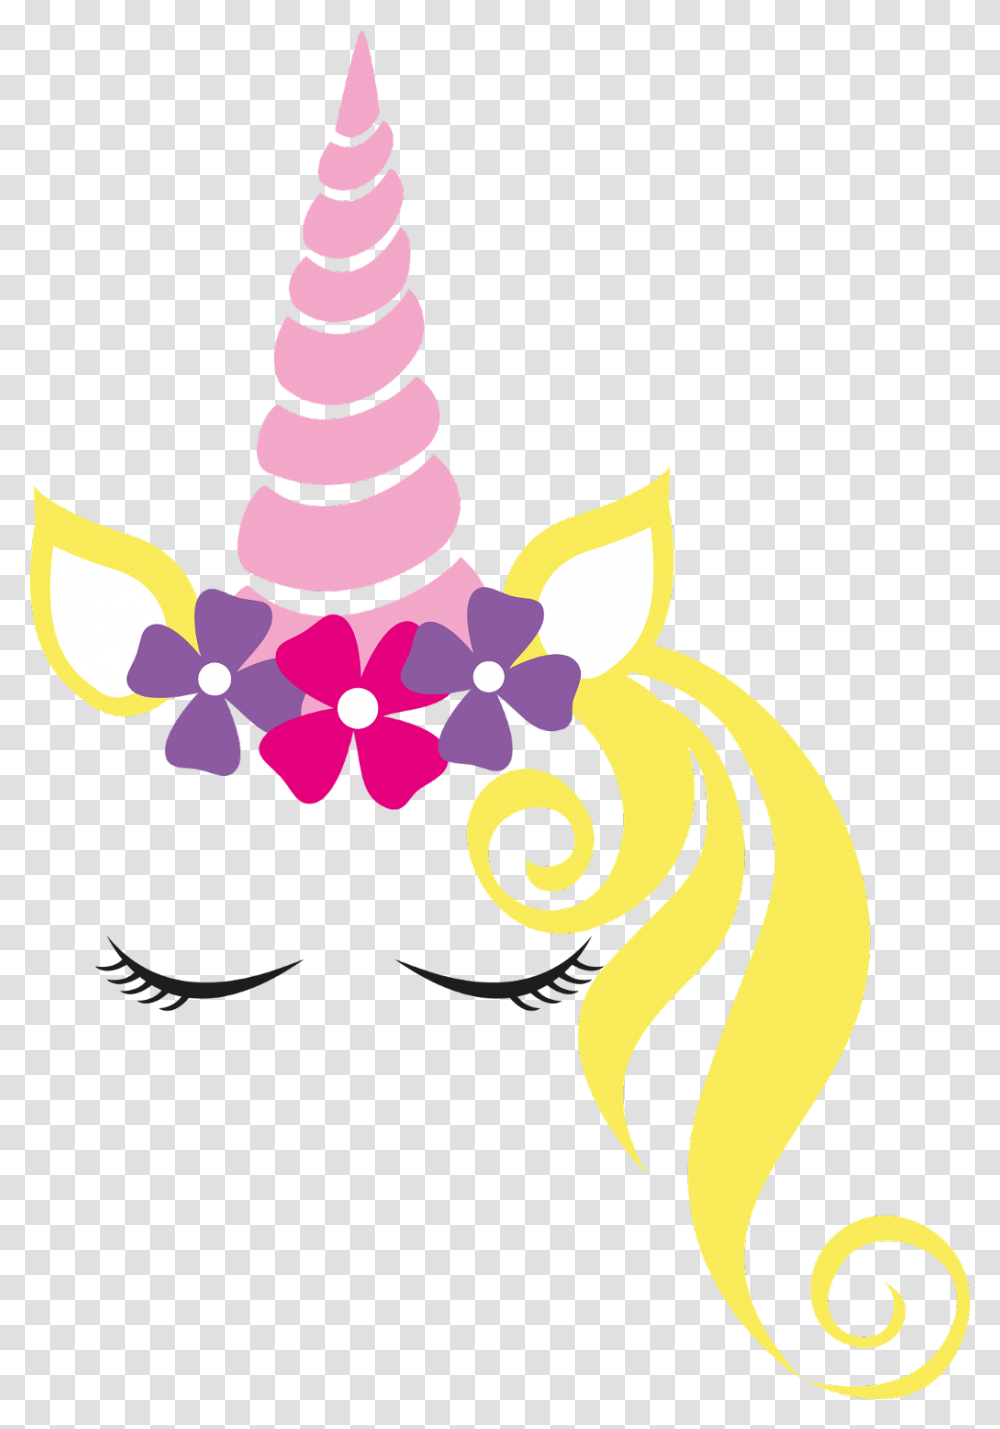 Unicorn Decoration Mask Eyes Pink Flowers Decoration Unicorn First Day Of School, Floral Design Transparent Png